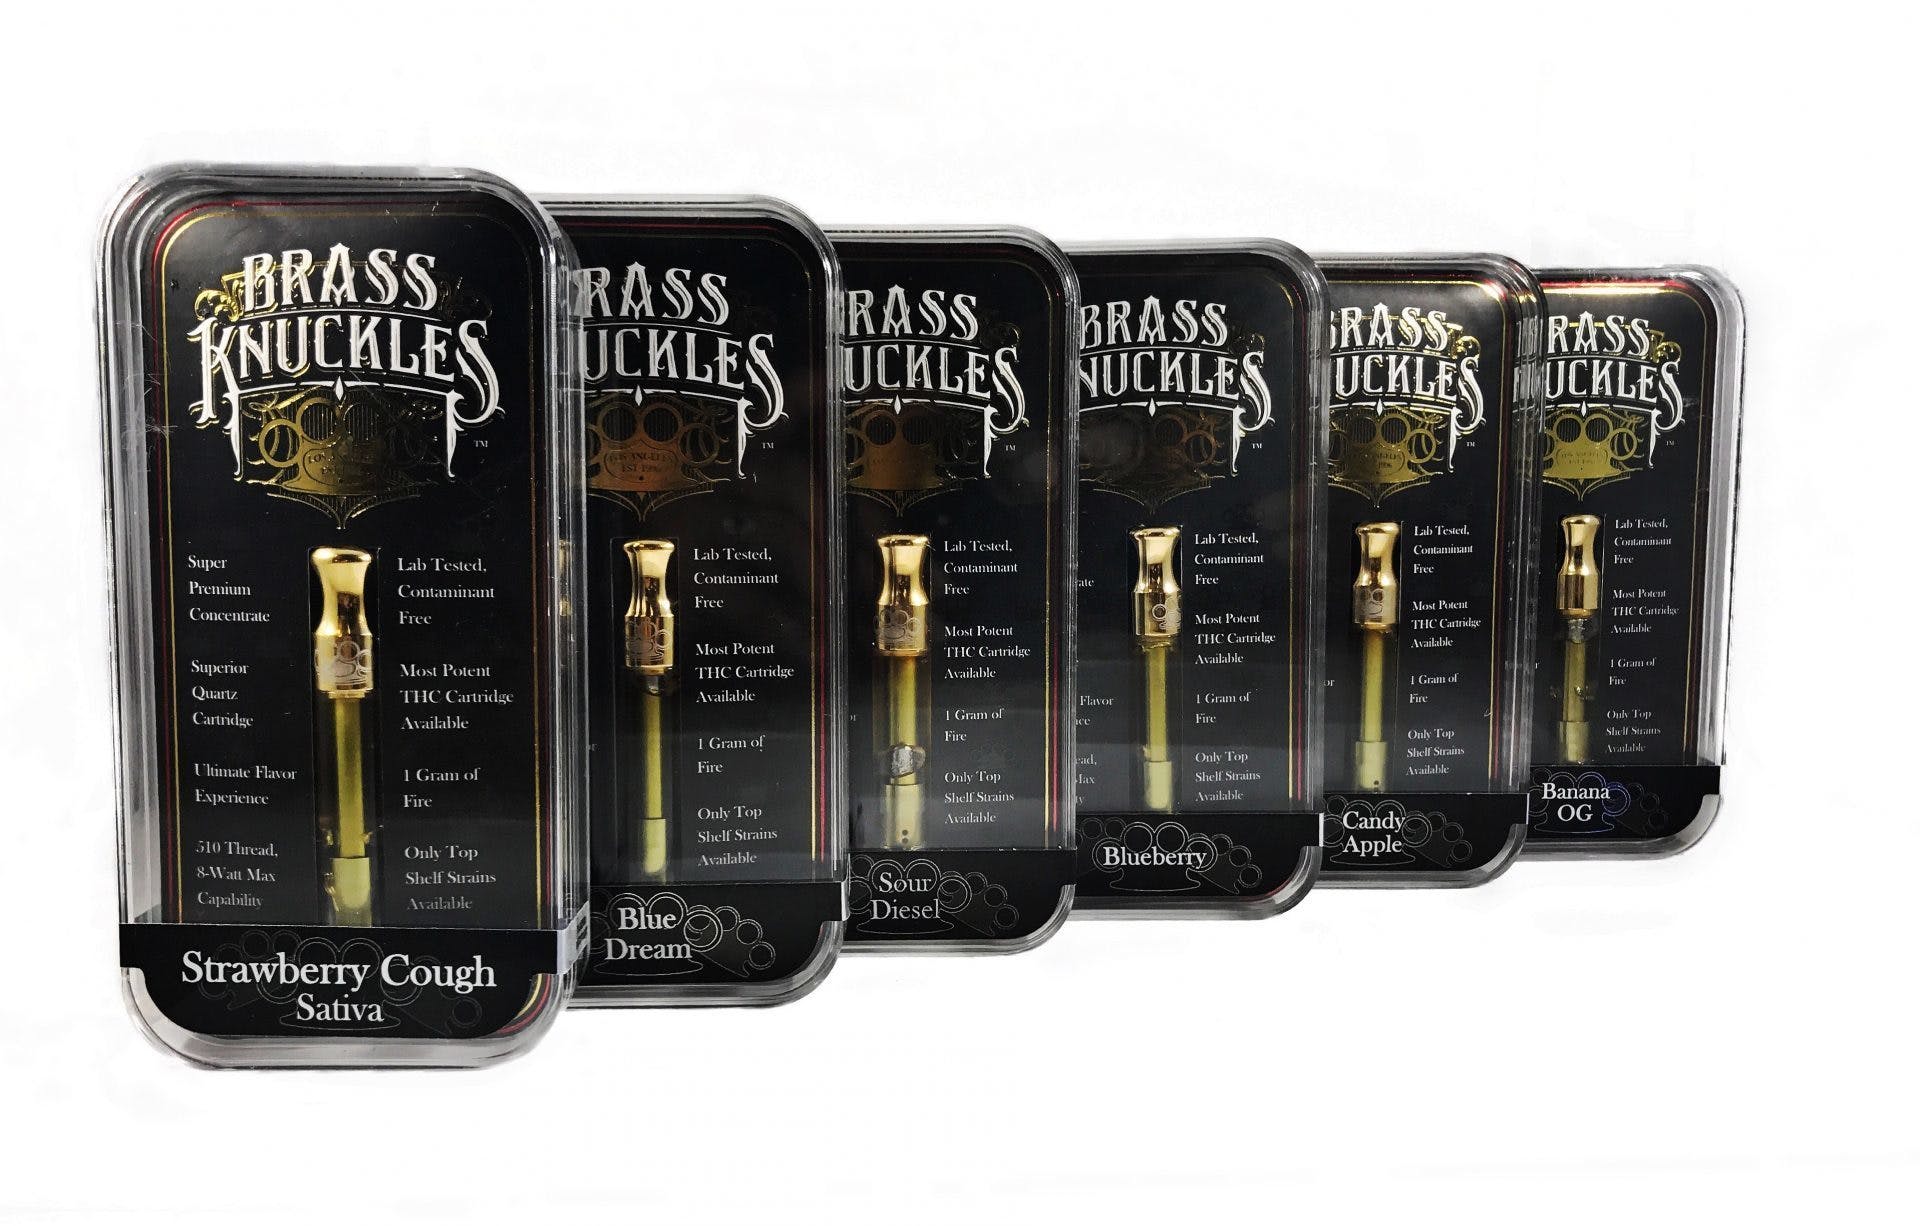 concentrate-brass-knuckles-jack-h-3-for-90-21-mix-n-match-21